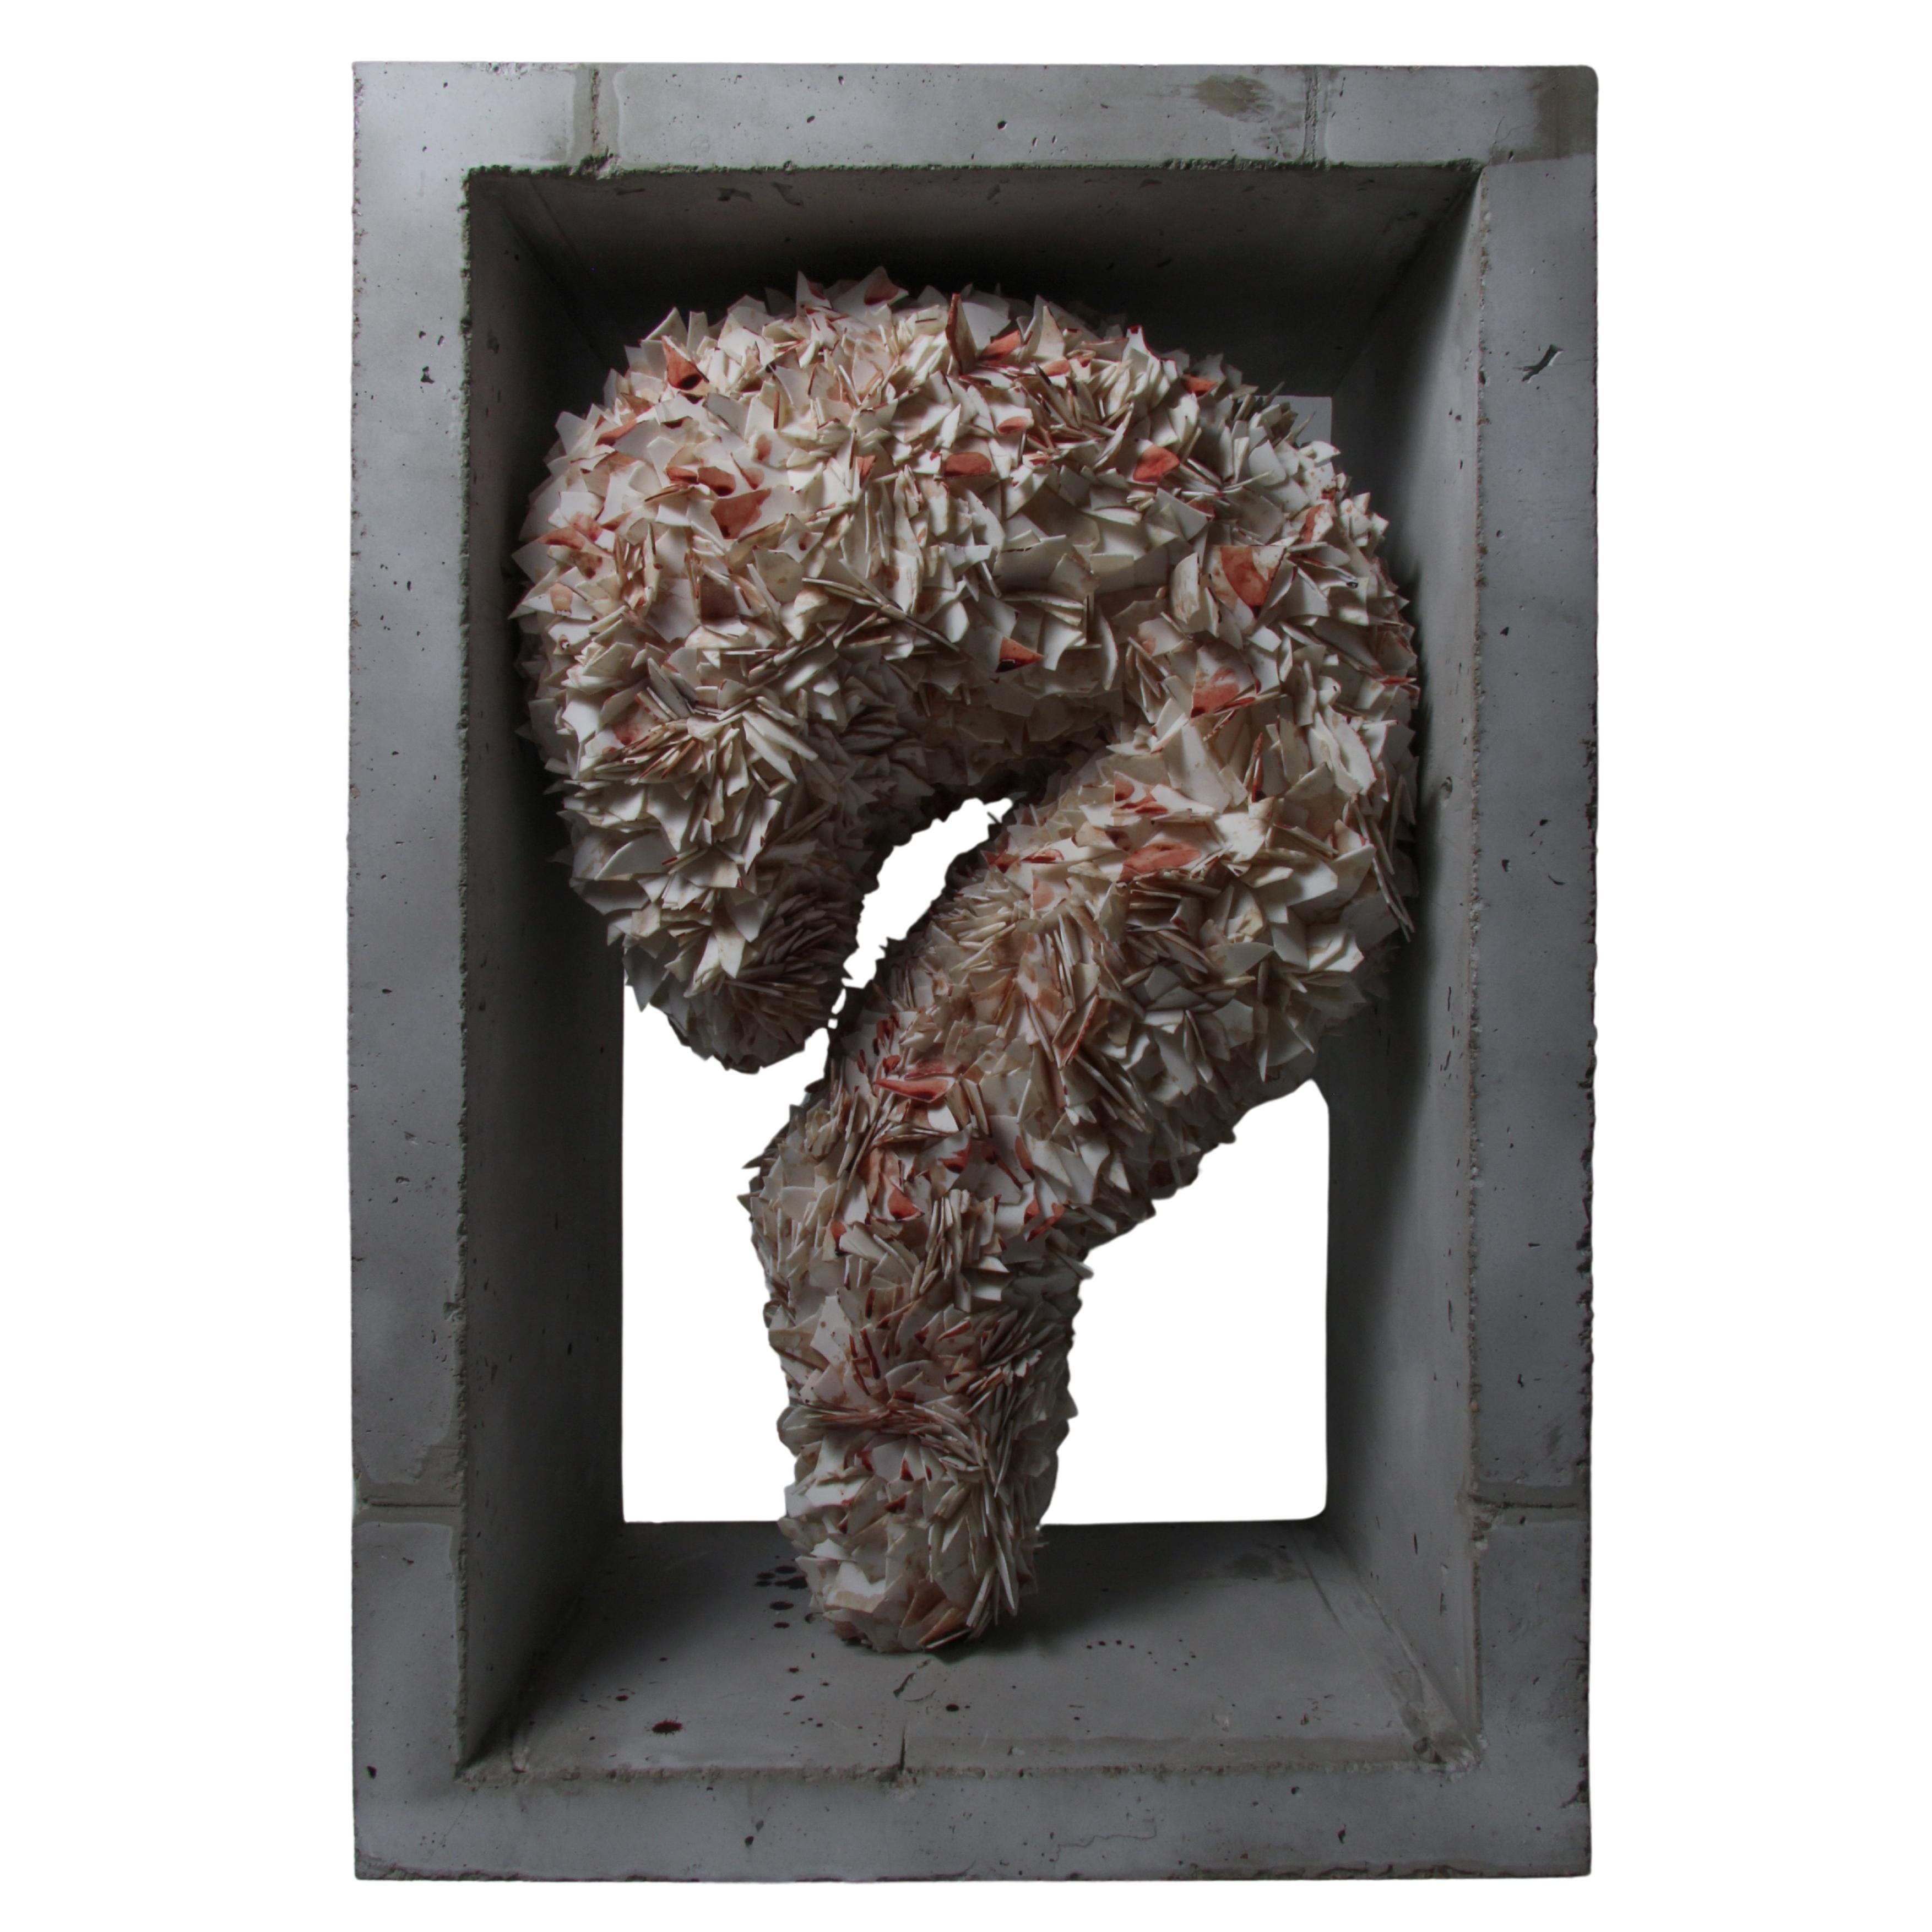 Contemporary Ceramic Sculpture Hands in Blood by Yulia Batyrova Marat Mukhametov For Sale